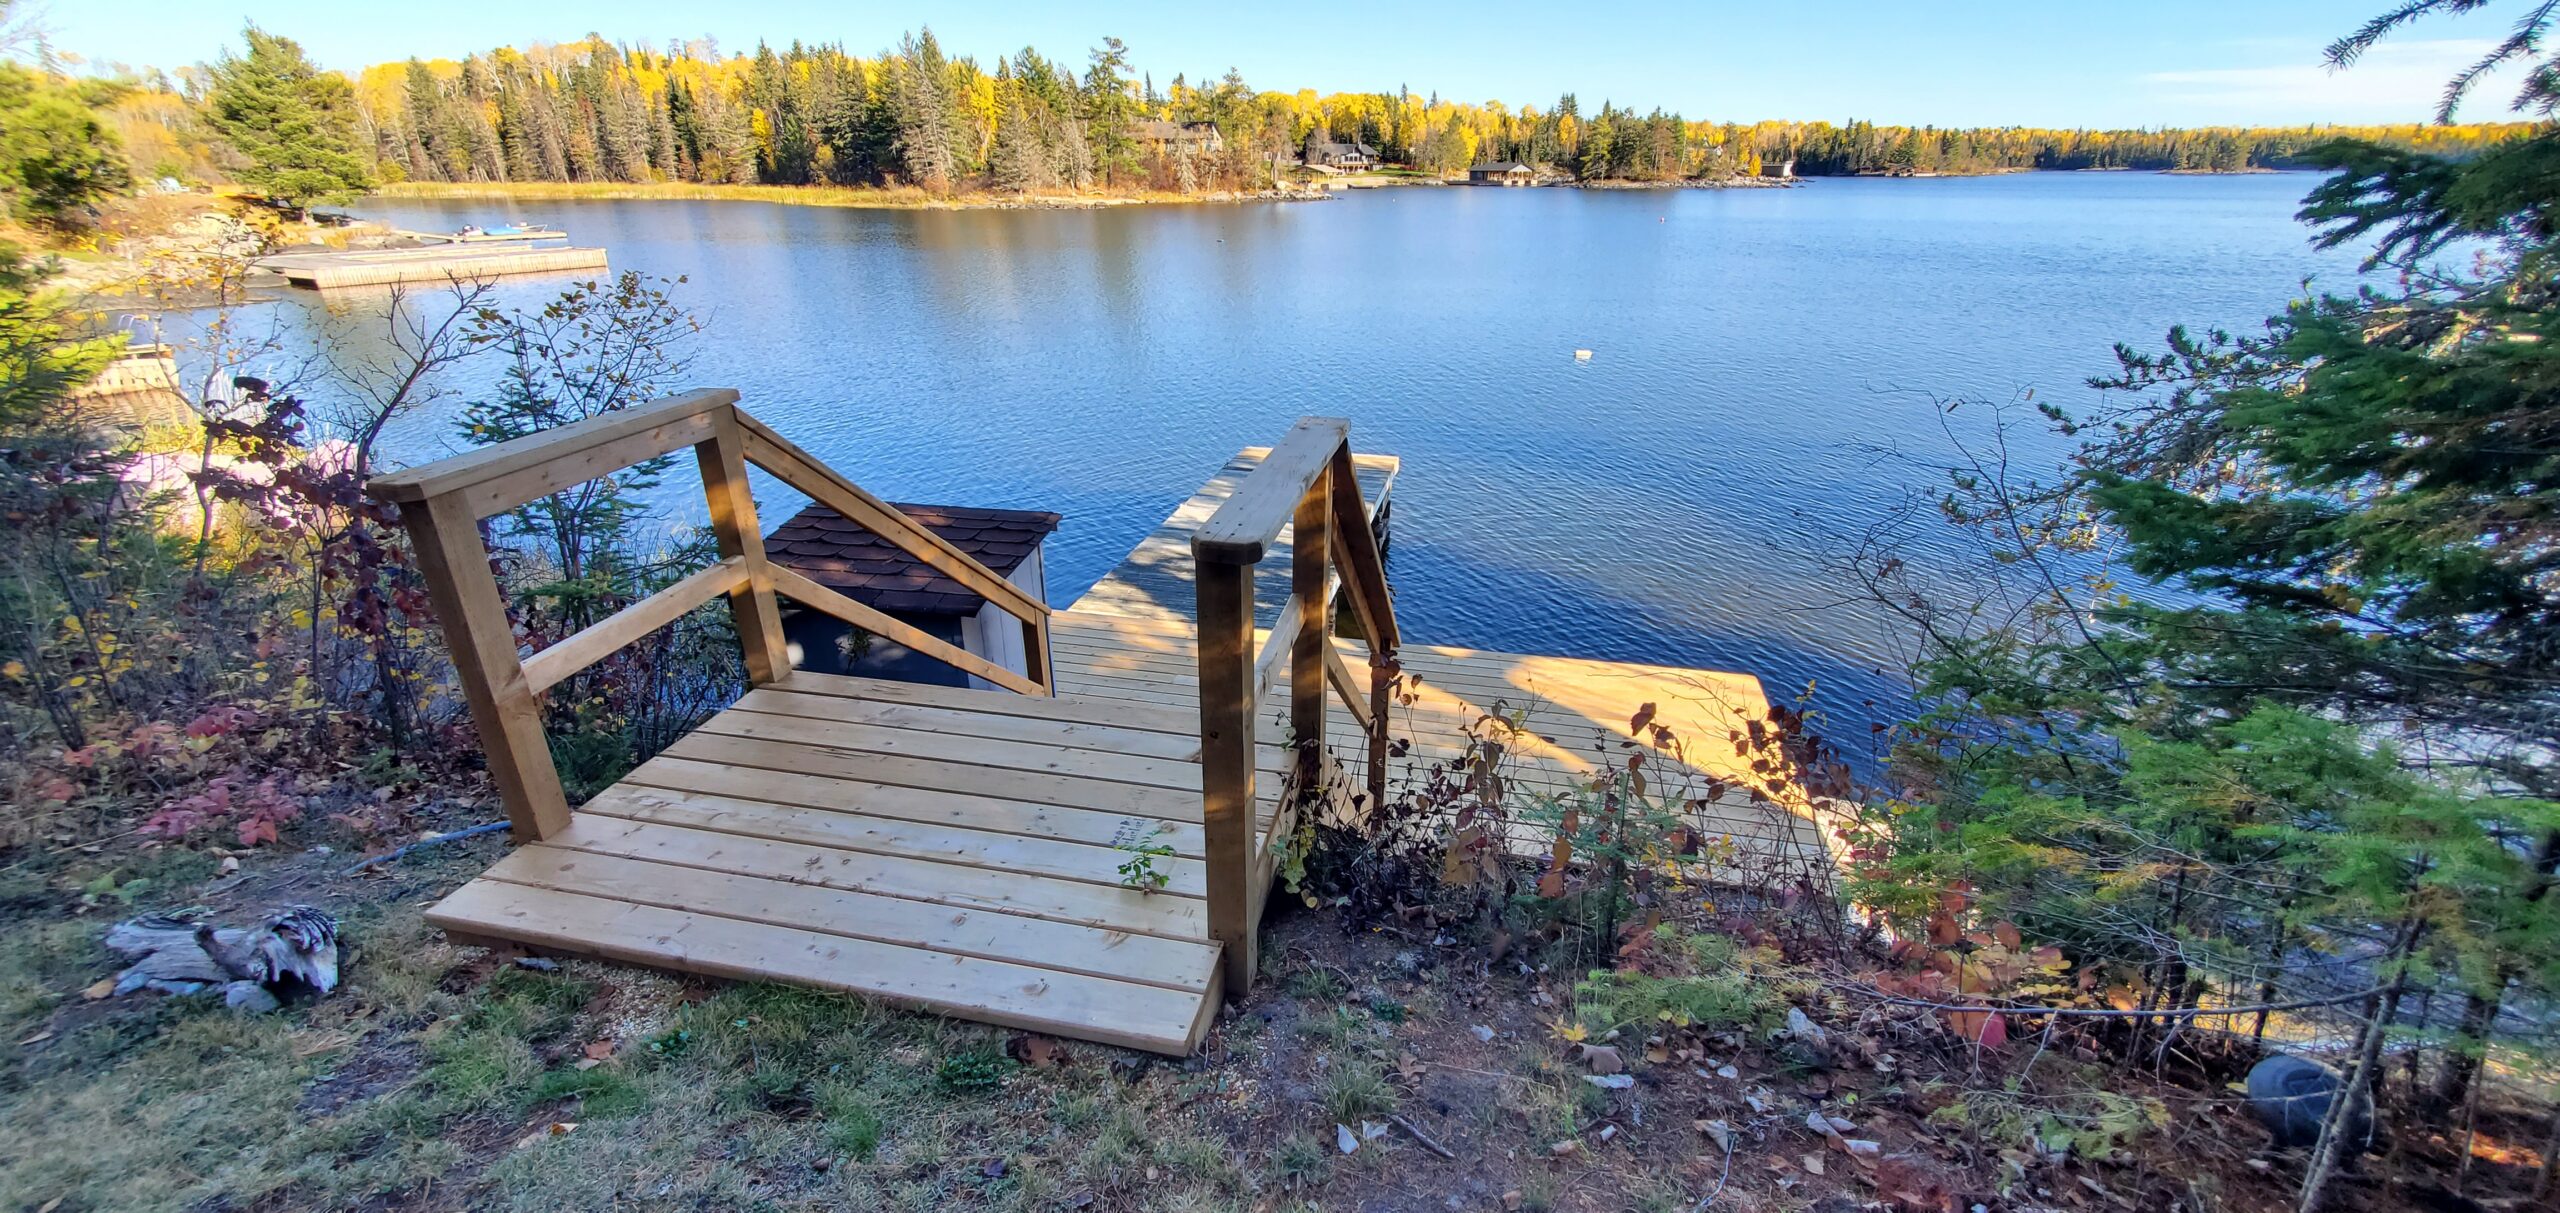 Wooden stairs lead down to a dock, which extends out into a blue lake from a big deck.